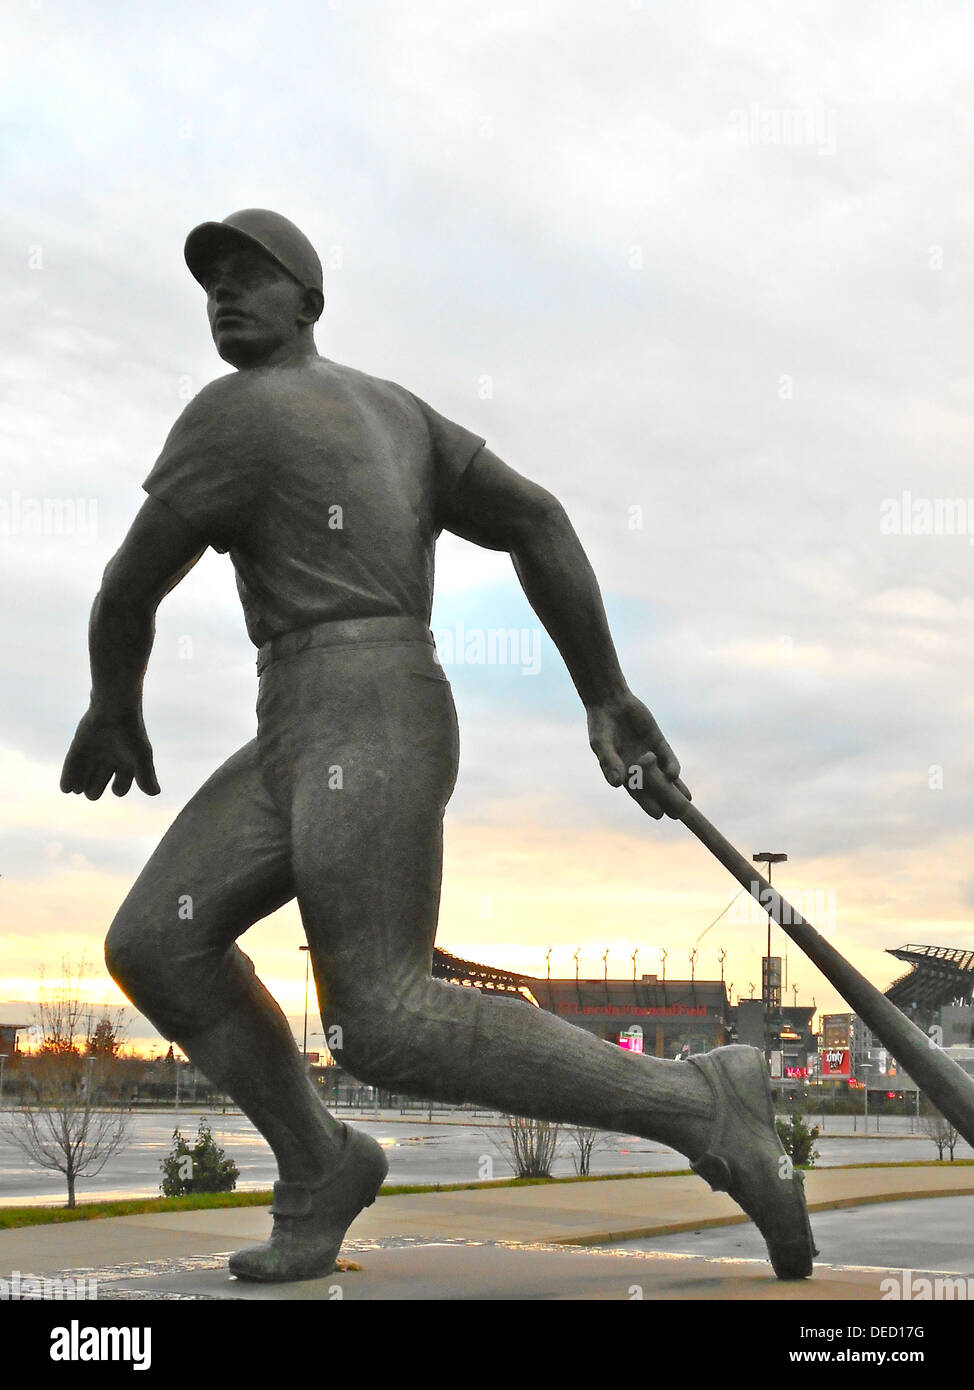 The Batter or Full Swing by Joe Brown (sculptor) installed in 1974 in Veterans Stadium, 'moved' to Citizens Bank Park. Bronze sculpture; concrete base. SIRIS reference IAS PA000184. Stock Photo